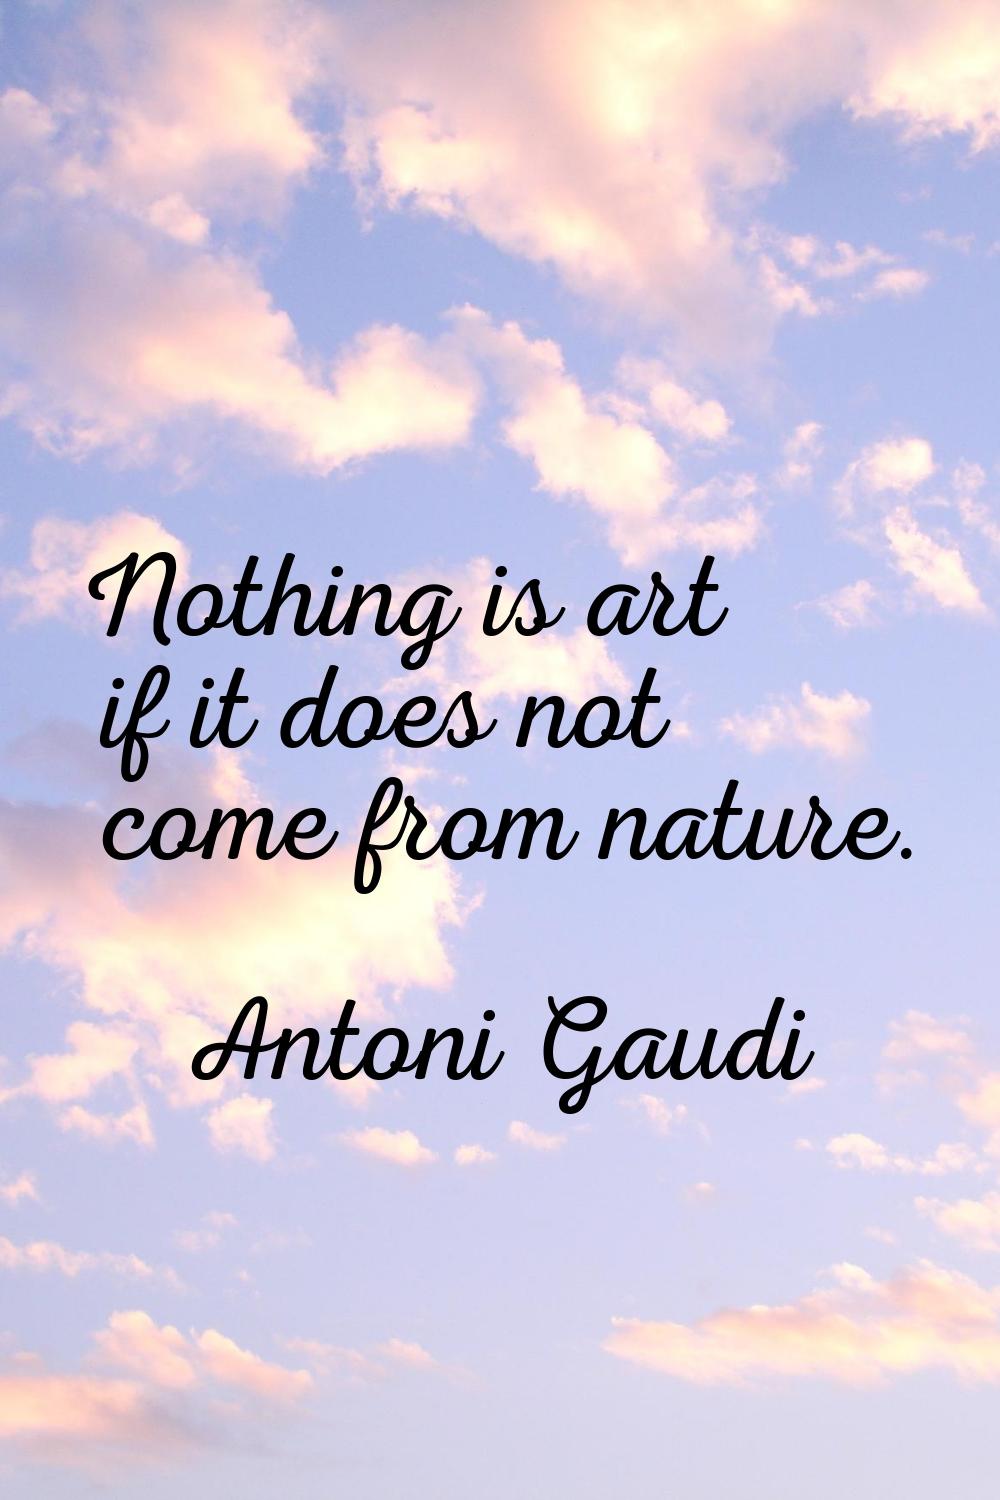 Nothing is art if it does not come from nature.